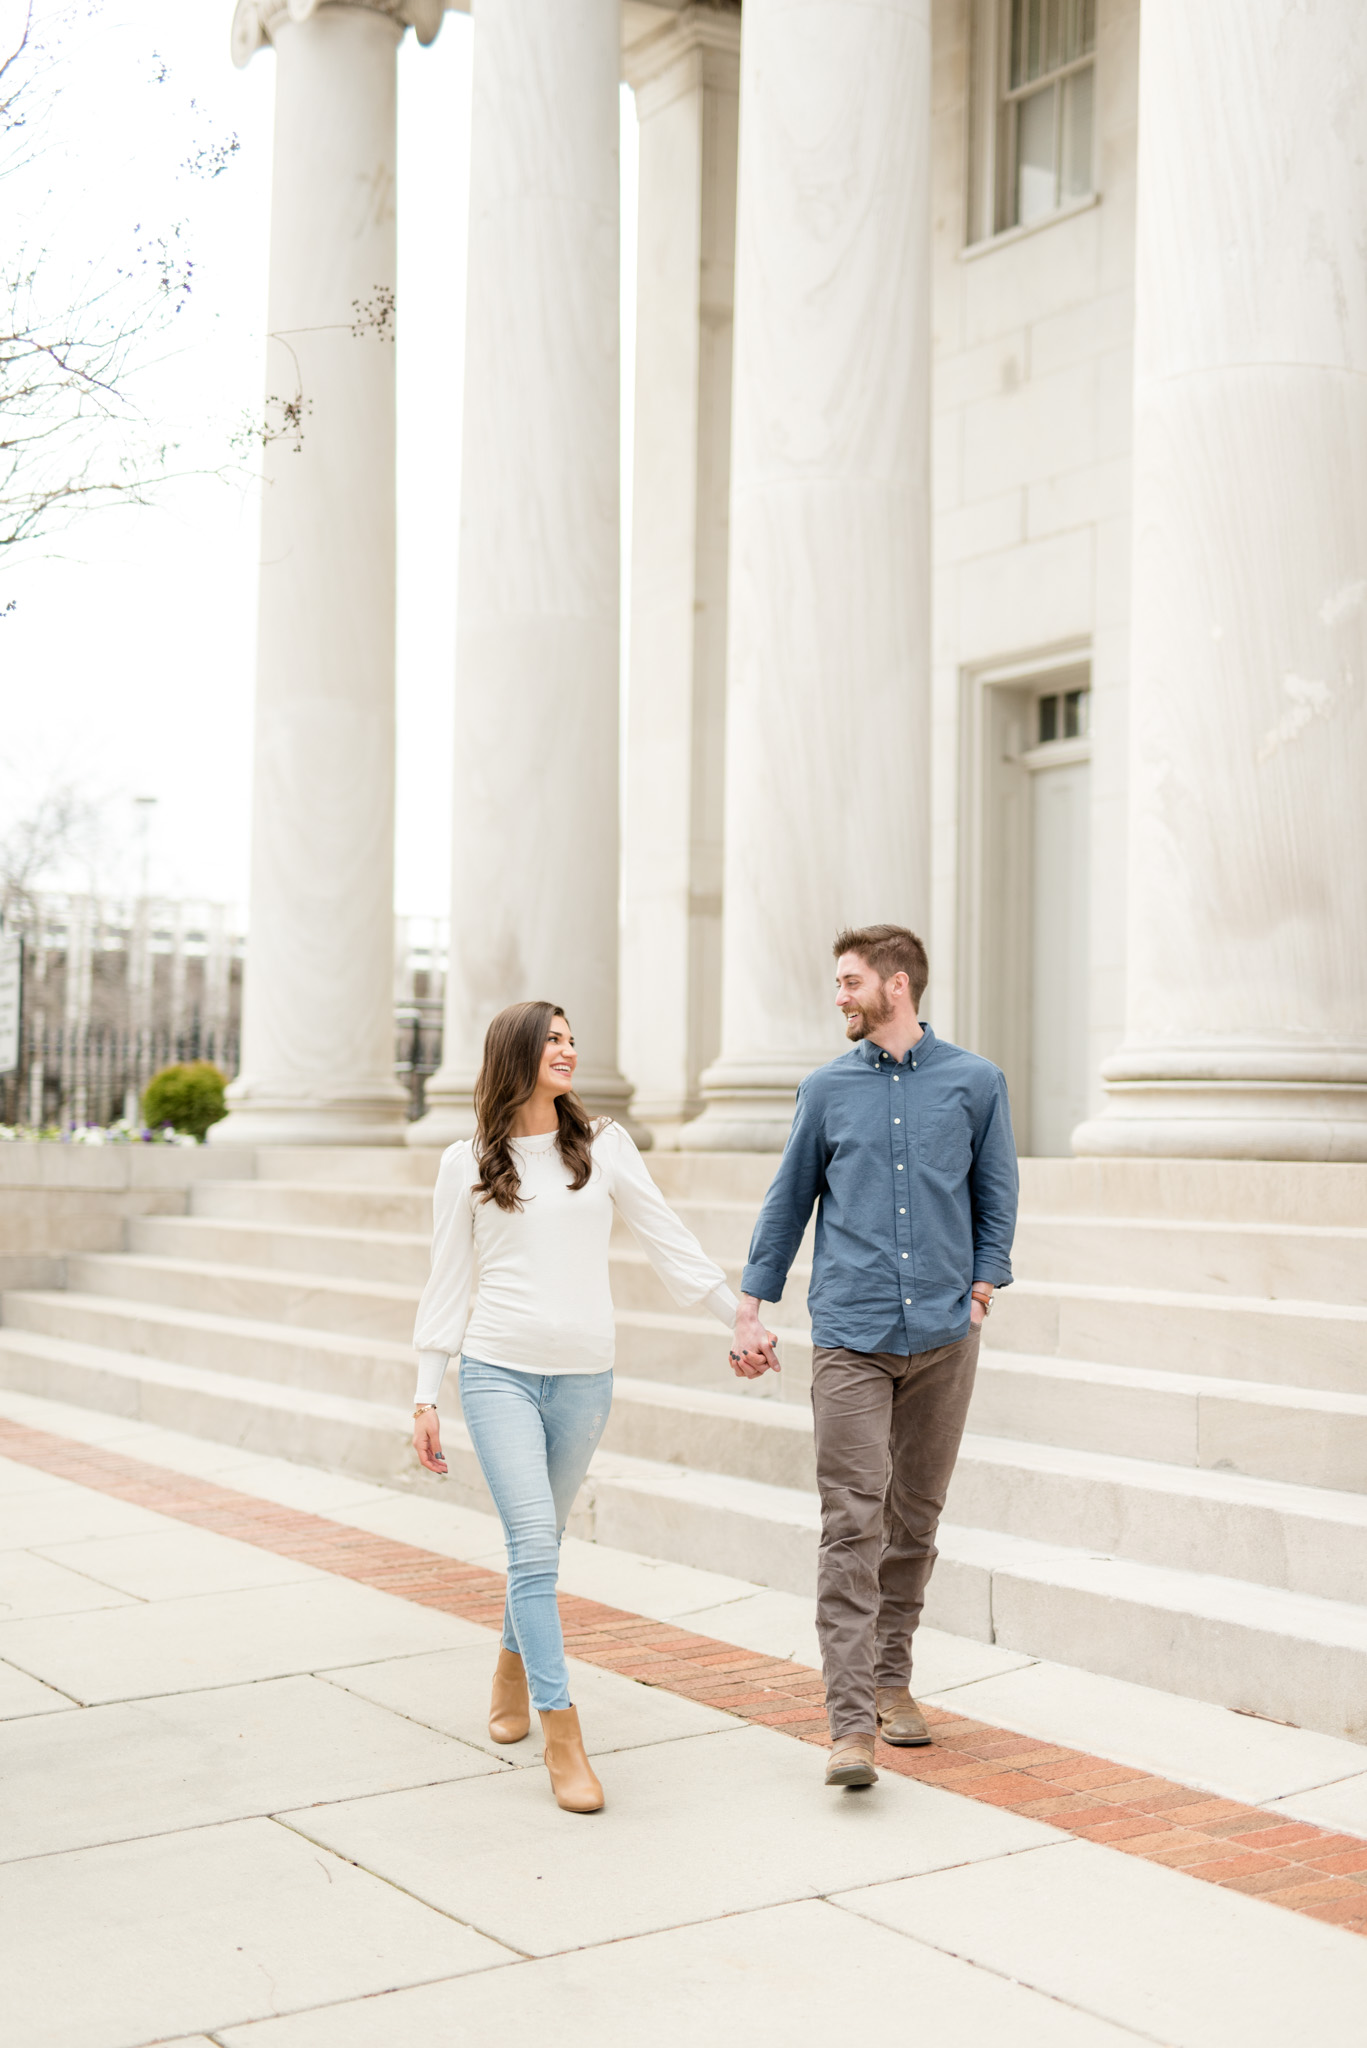 Engaged couple walk in front of columns.